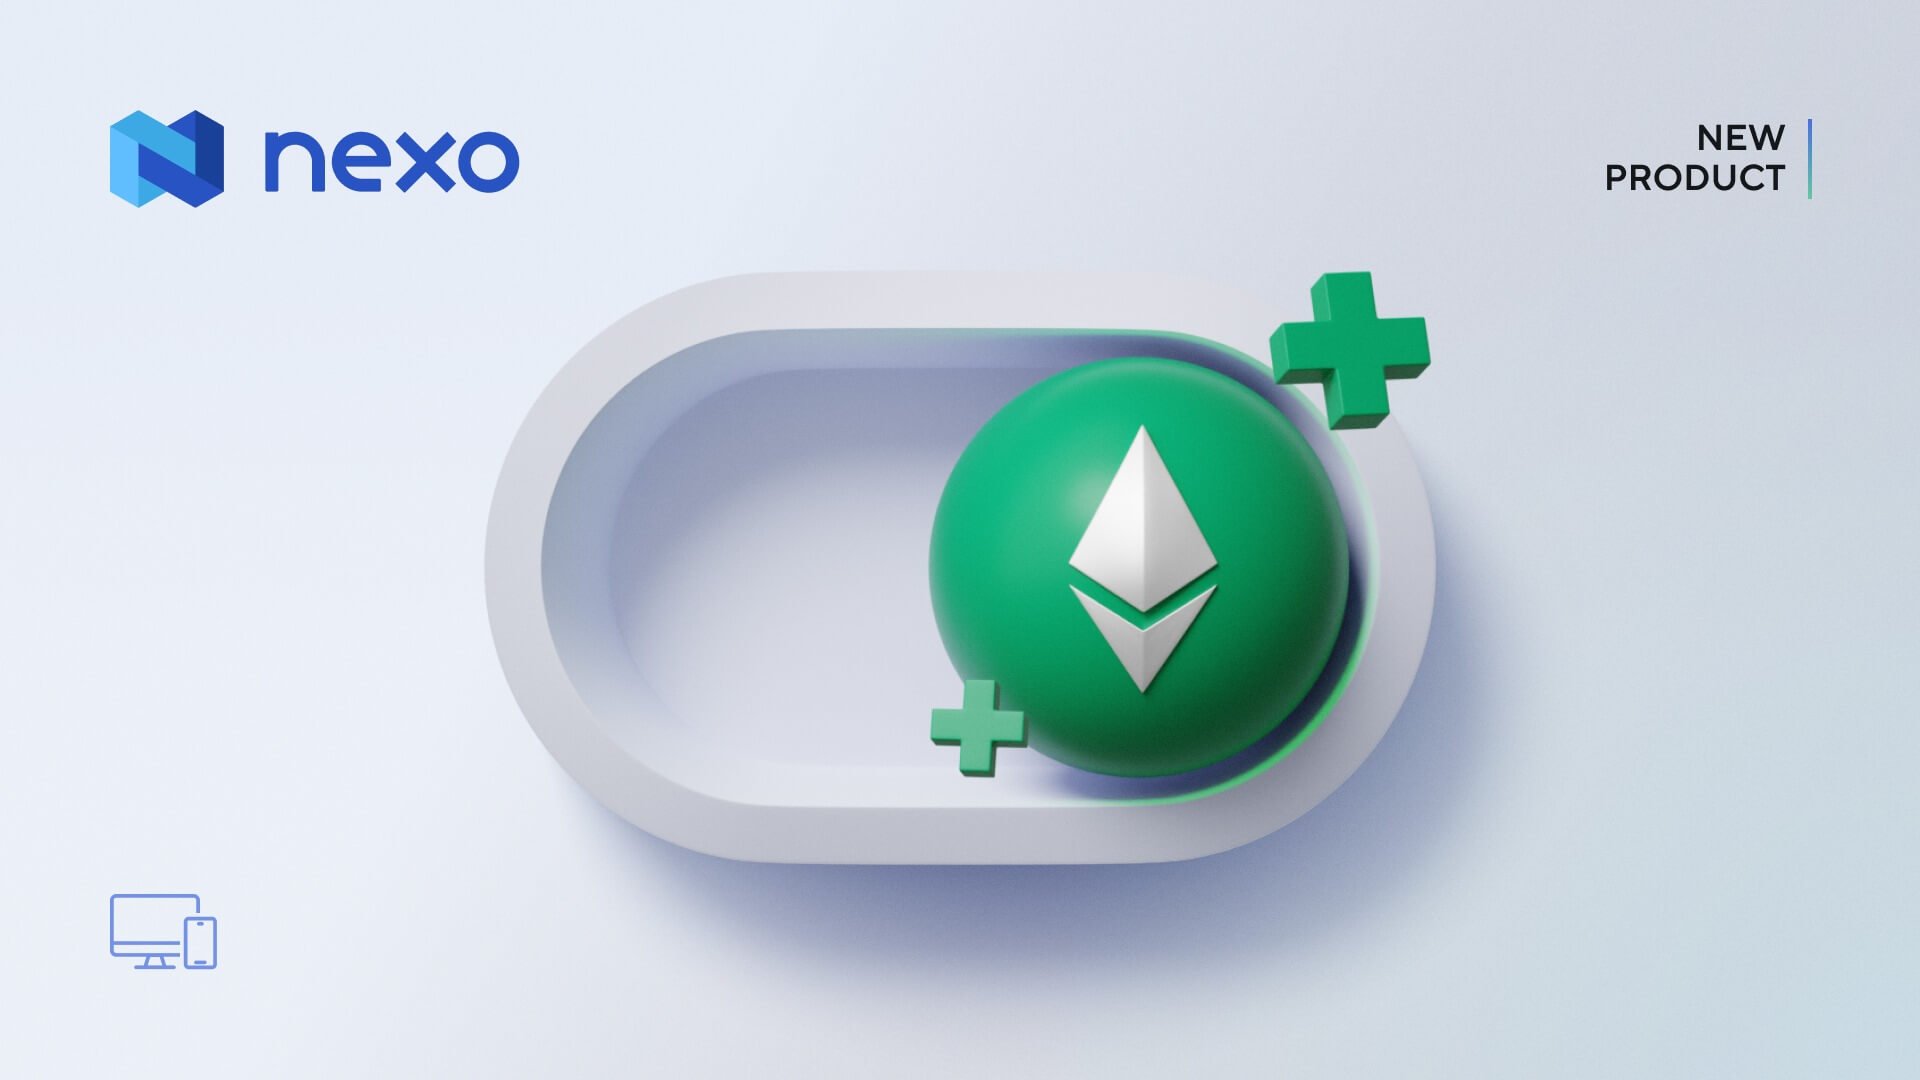 Ethereum Smart Staking Is Live on Nexo!